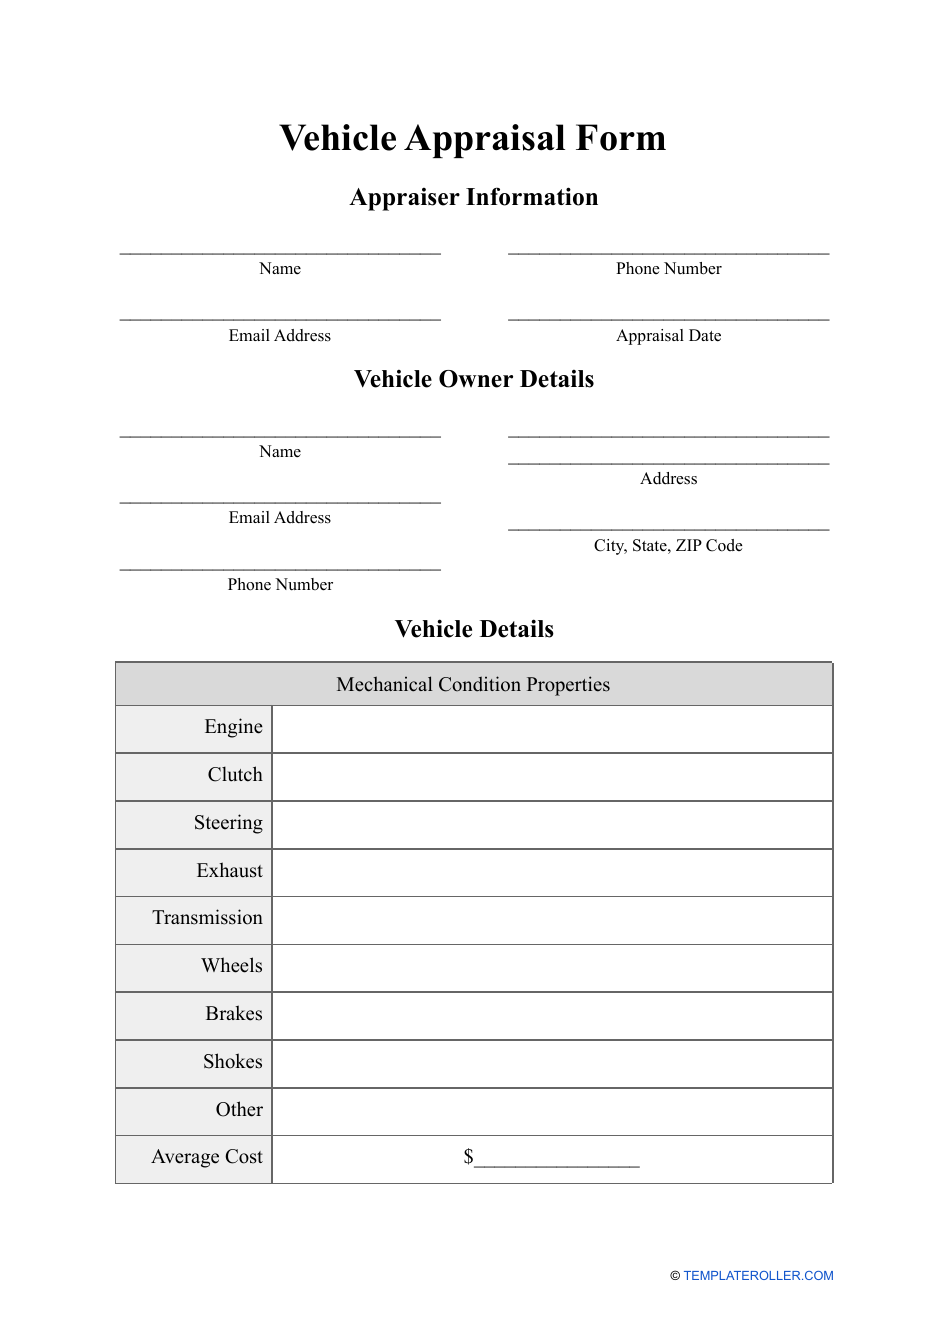 Vehicle Appraisal Form, Page 1